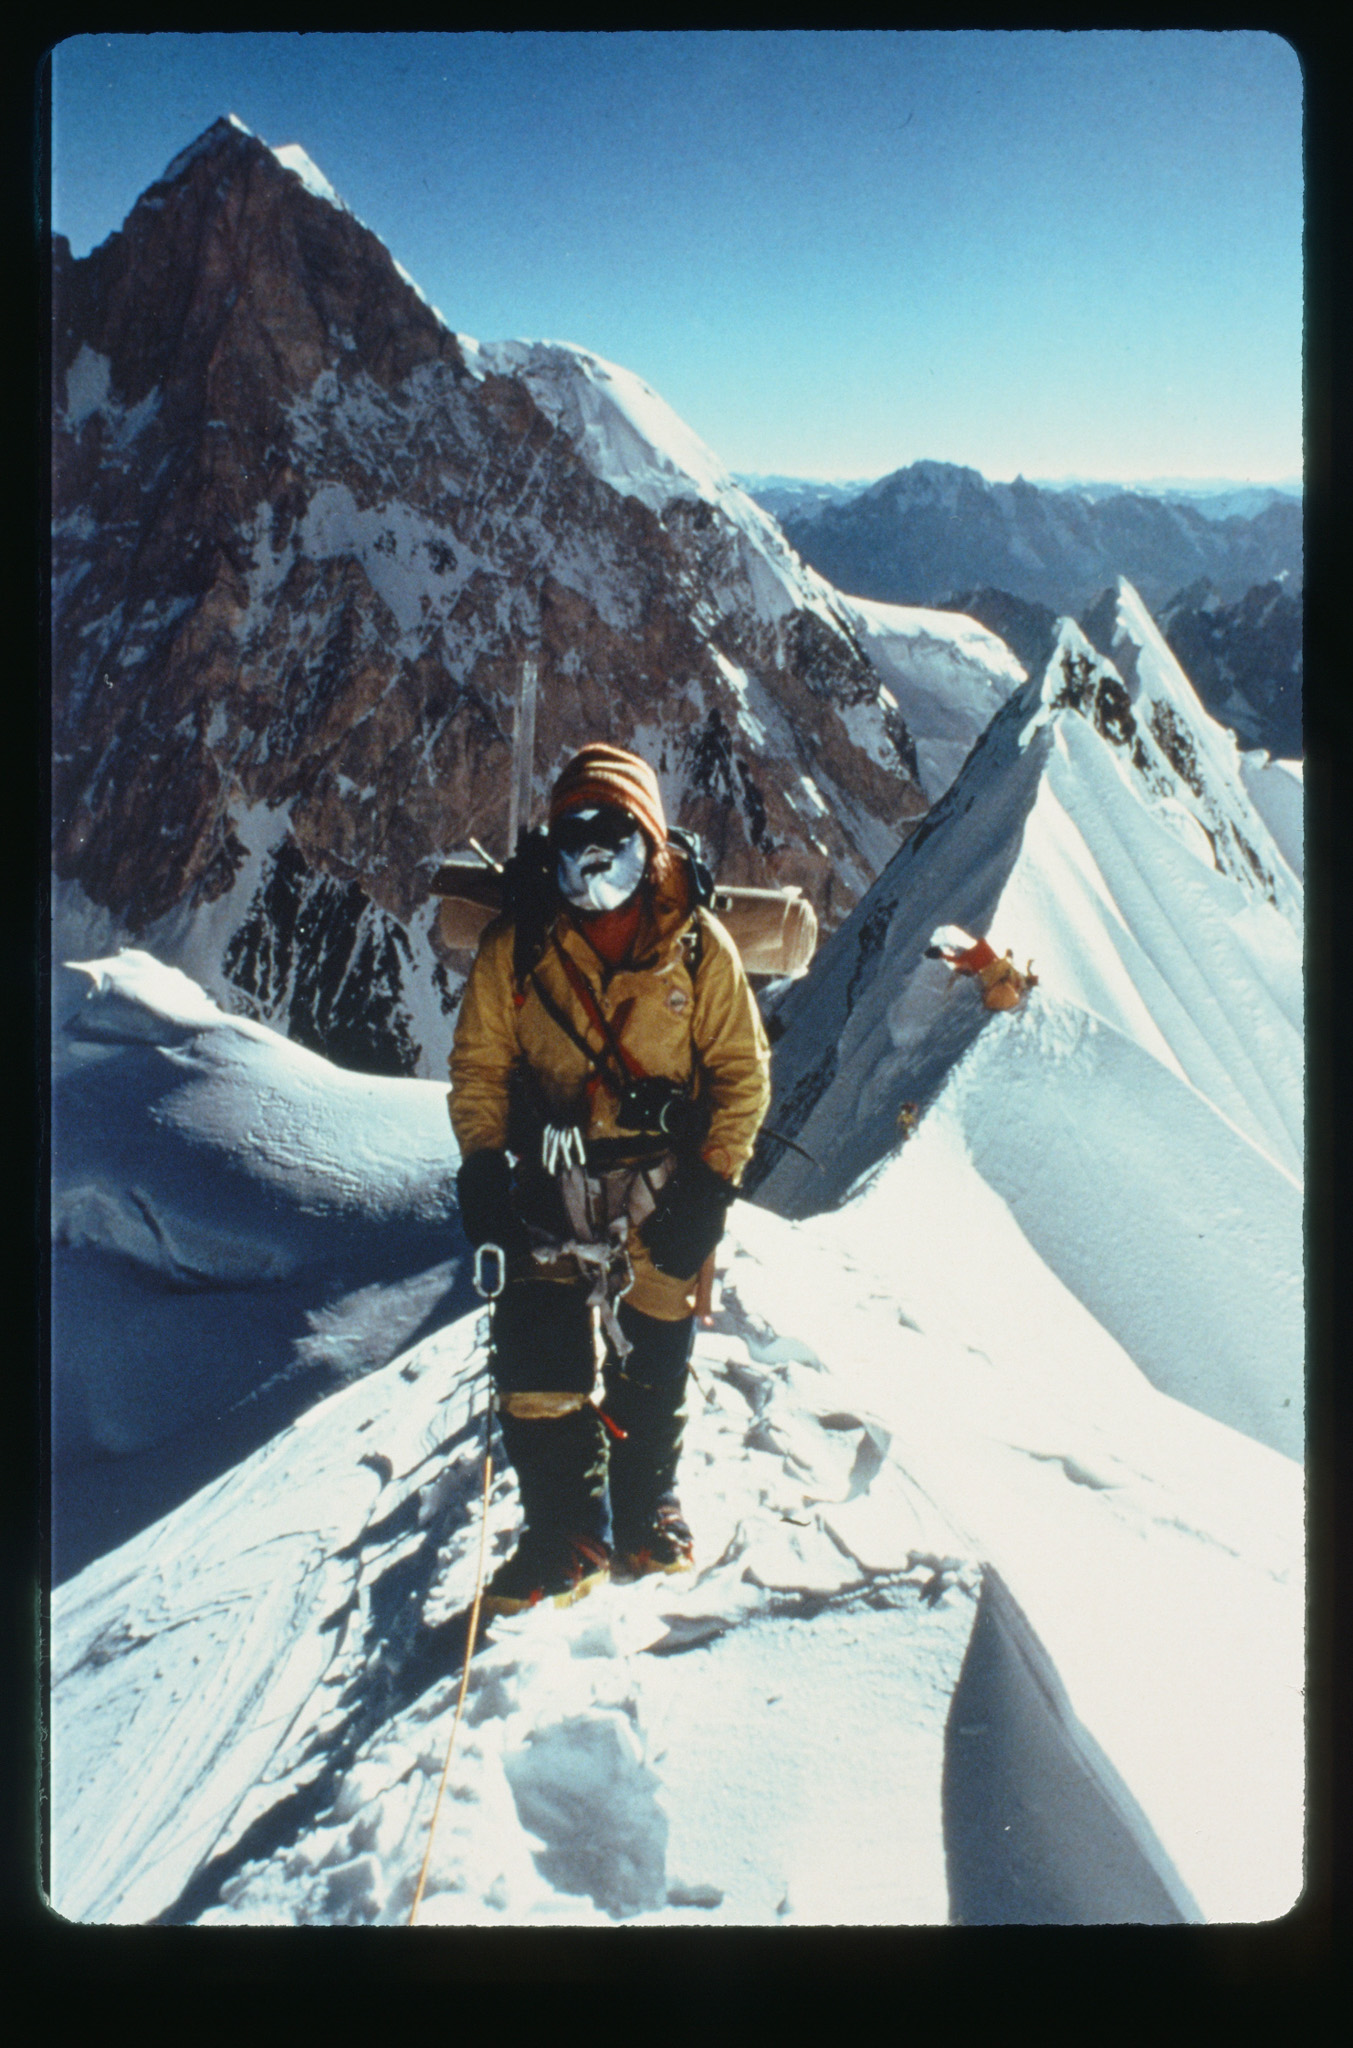 Rick Ridgeway leaves Camp 4 on the Northeast Ridge of K2 on the American ascent in 1978. The Northeast Ridge was a new route that would become the third ascent of K2 and the first without oxygen.